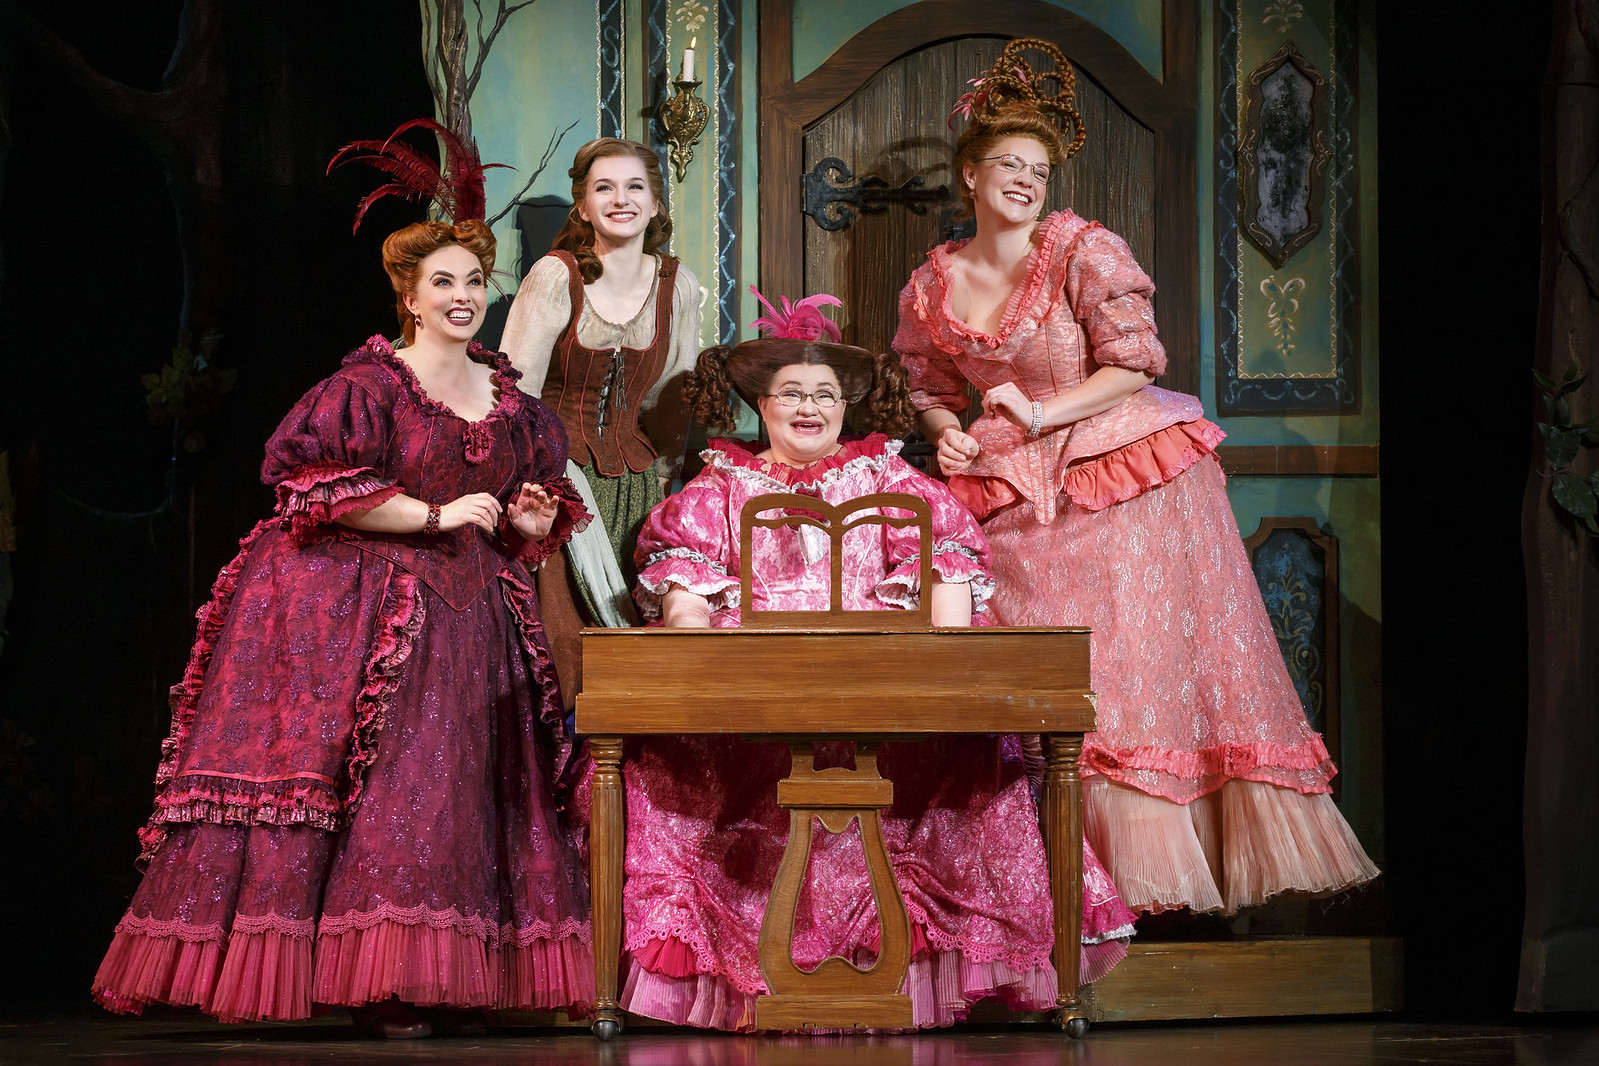 Sarah Smith, Tatyana Lubov, Joanna Johnson, and Nicole Zelka in Rodgers + Hammerstein’s Cinderella. Photo: © Carol Rosegg // Broadway In Detroit: Rodgers + Hammerstein’s Cinderella At The Fisher Theatre | via Wading in Big Shoes